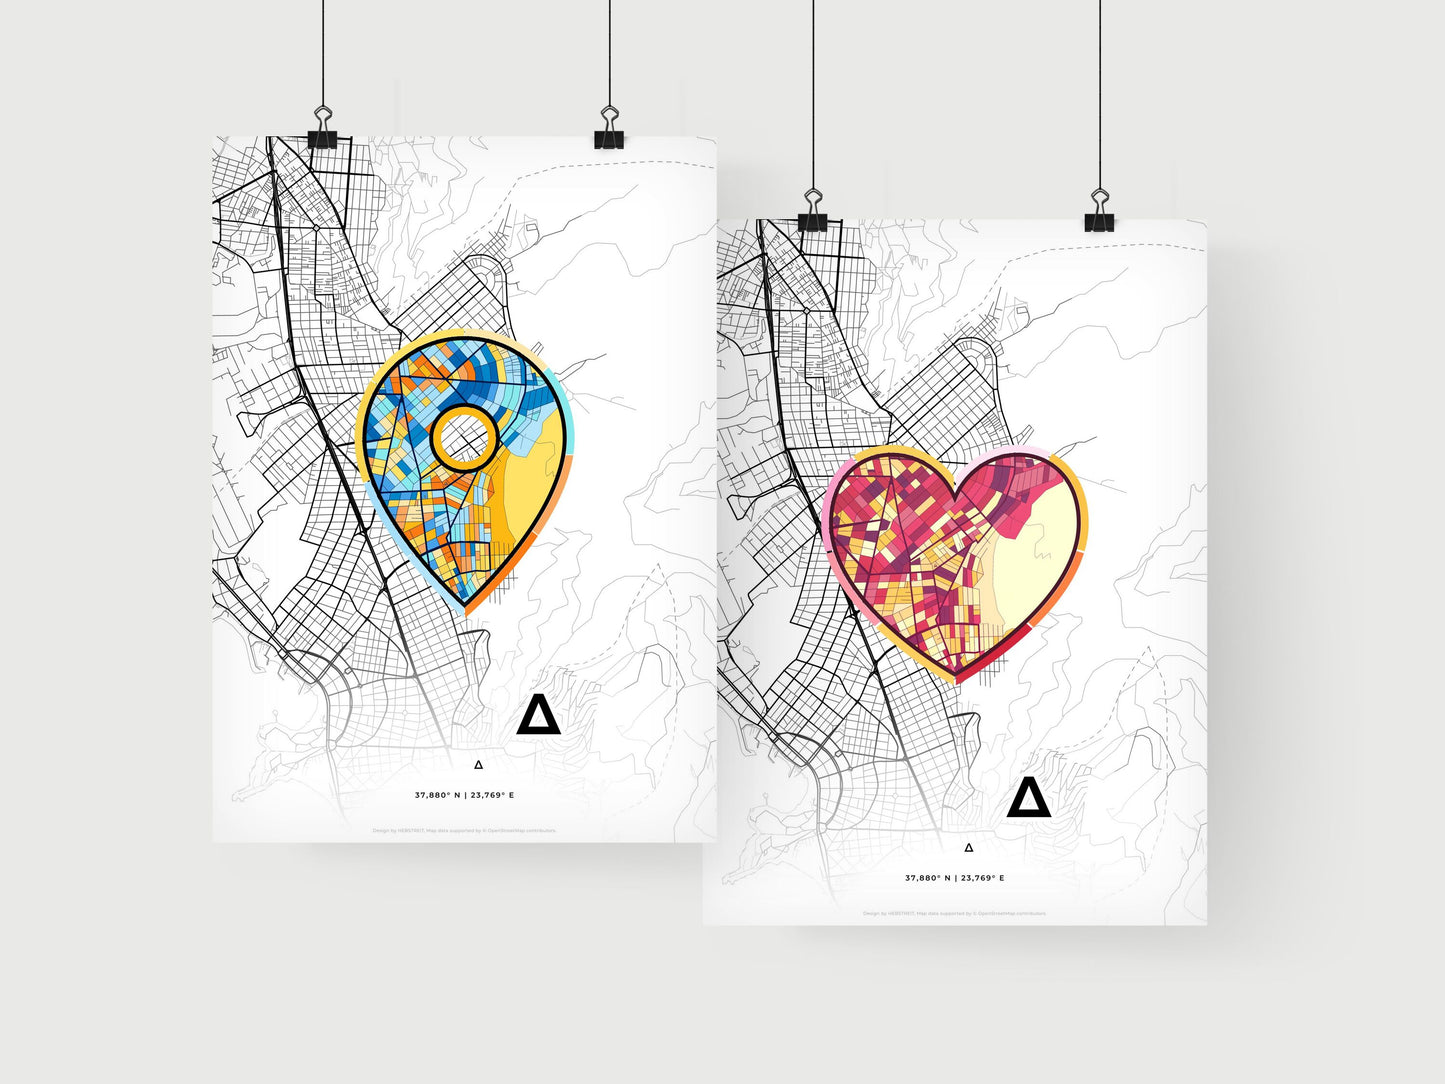 GLYFADA GREECE minimal art map with a colorful icon. Where it all began, Couple map gift.